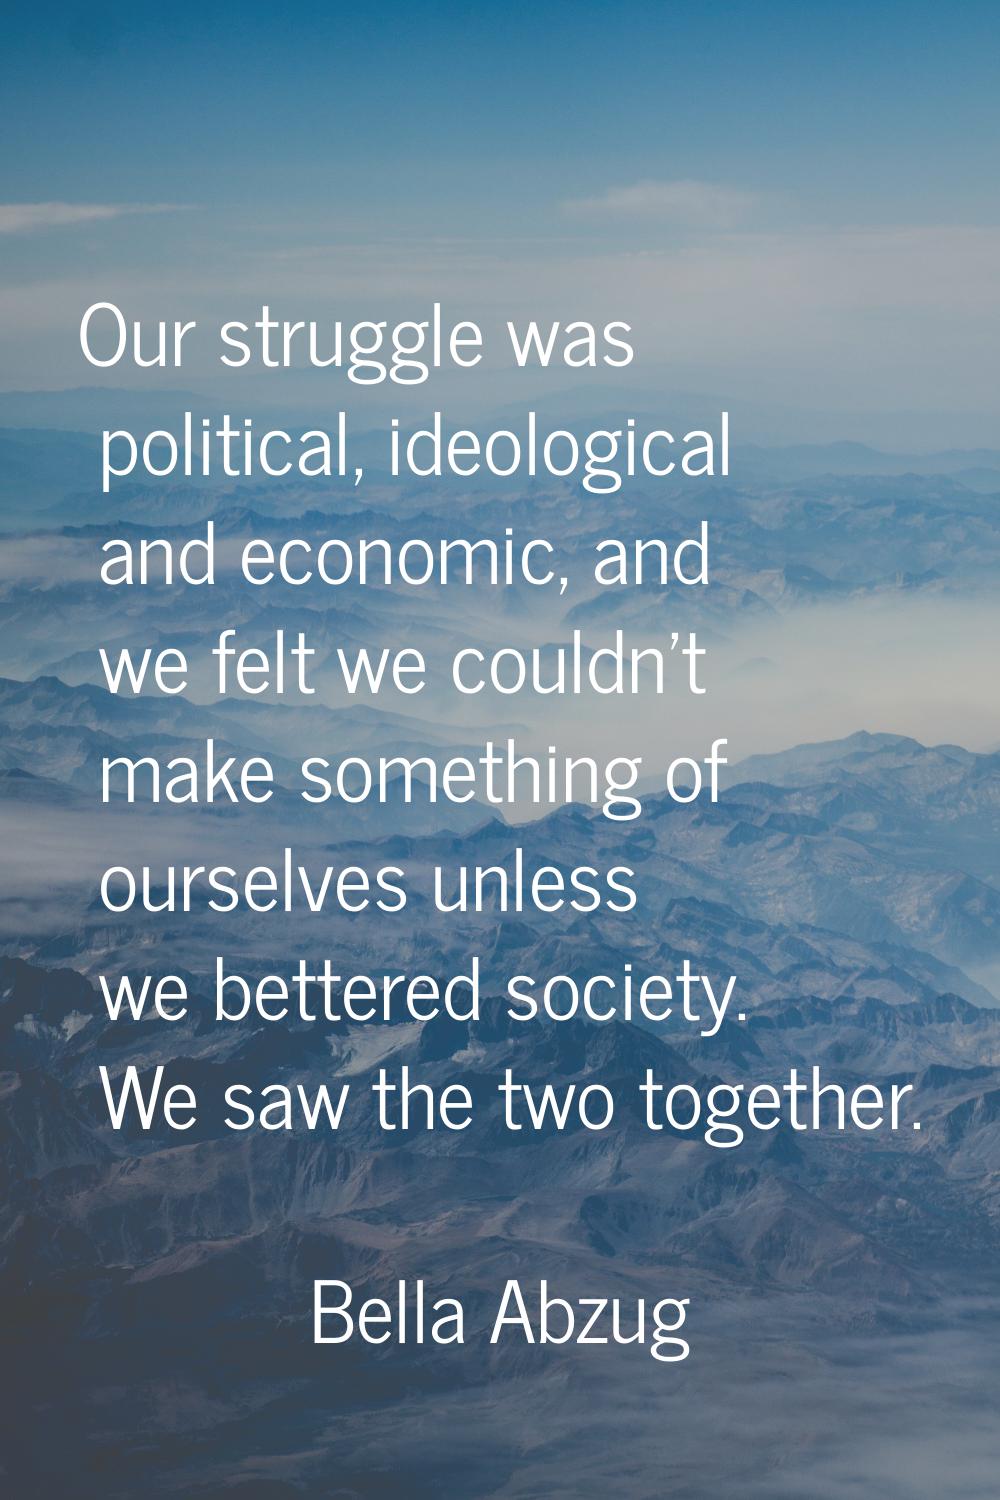 Our struggle was political, ideological and economic, and we felt we couldn't make something of our